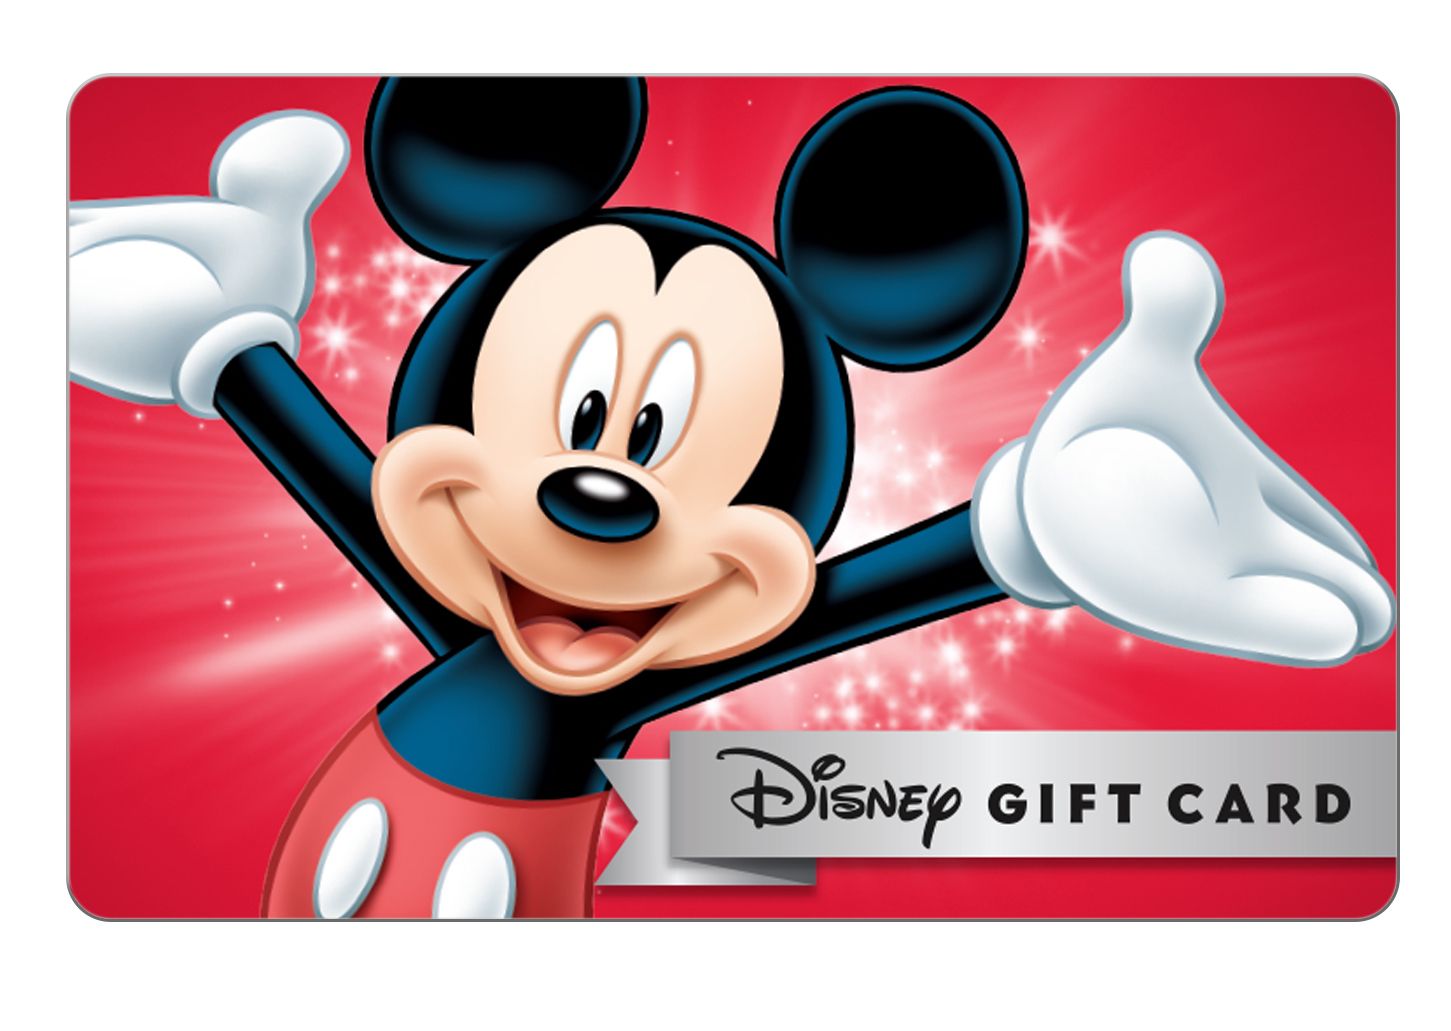 New: shopDisney Offers Same-Day Delivery on Select Disney Store Items! 